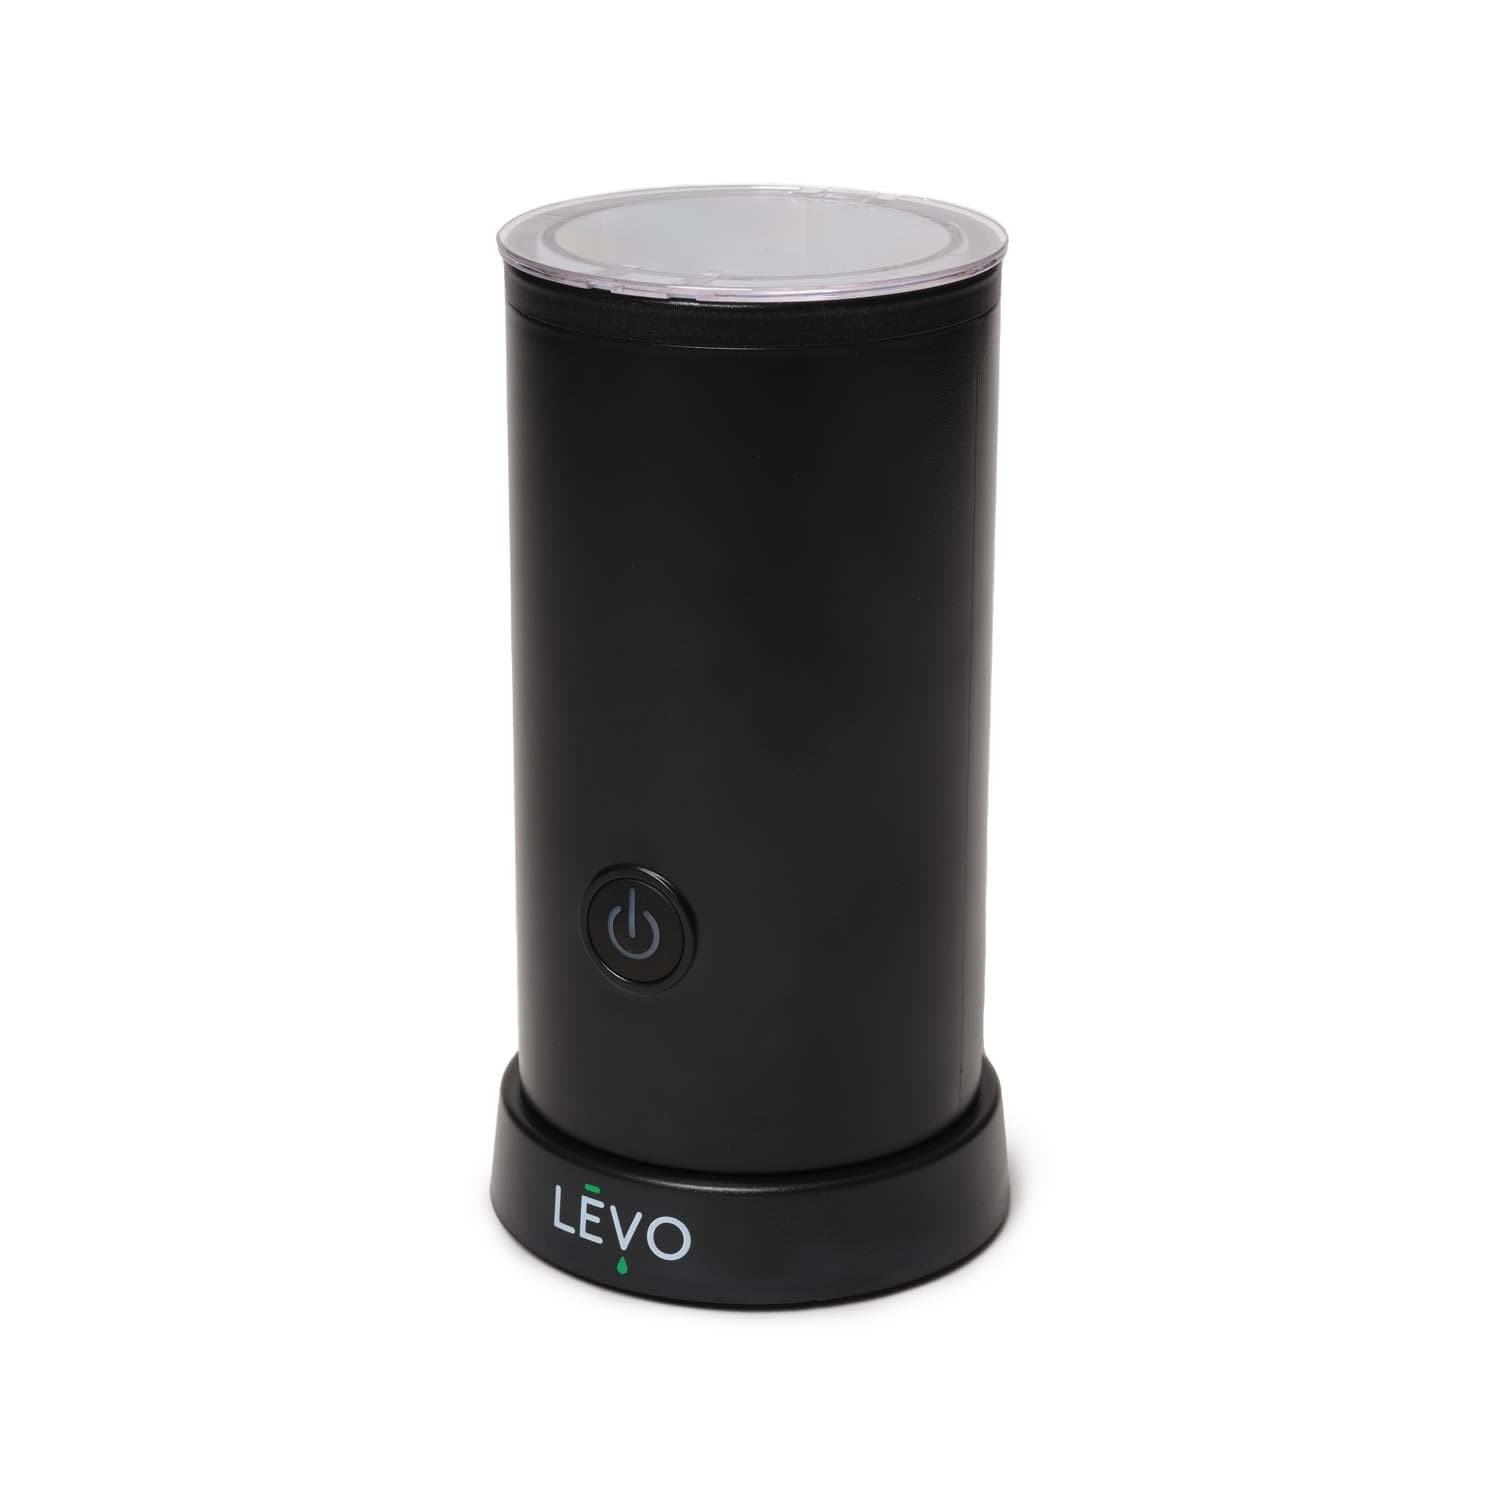 Simplify your gummy-making process with The LĒVO Gummy Candy Mixer.